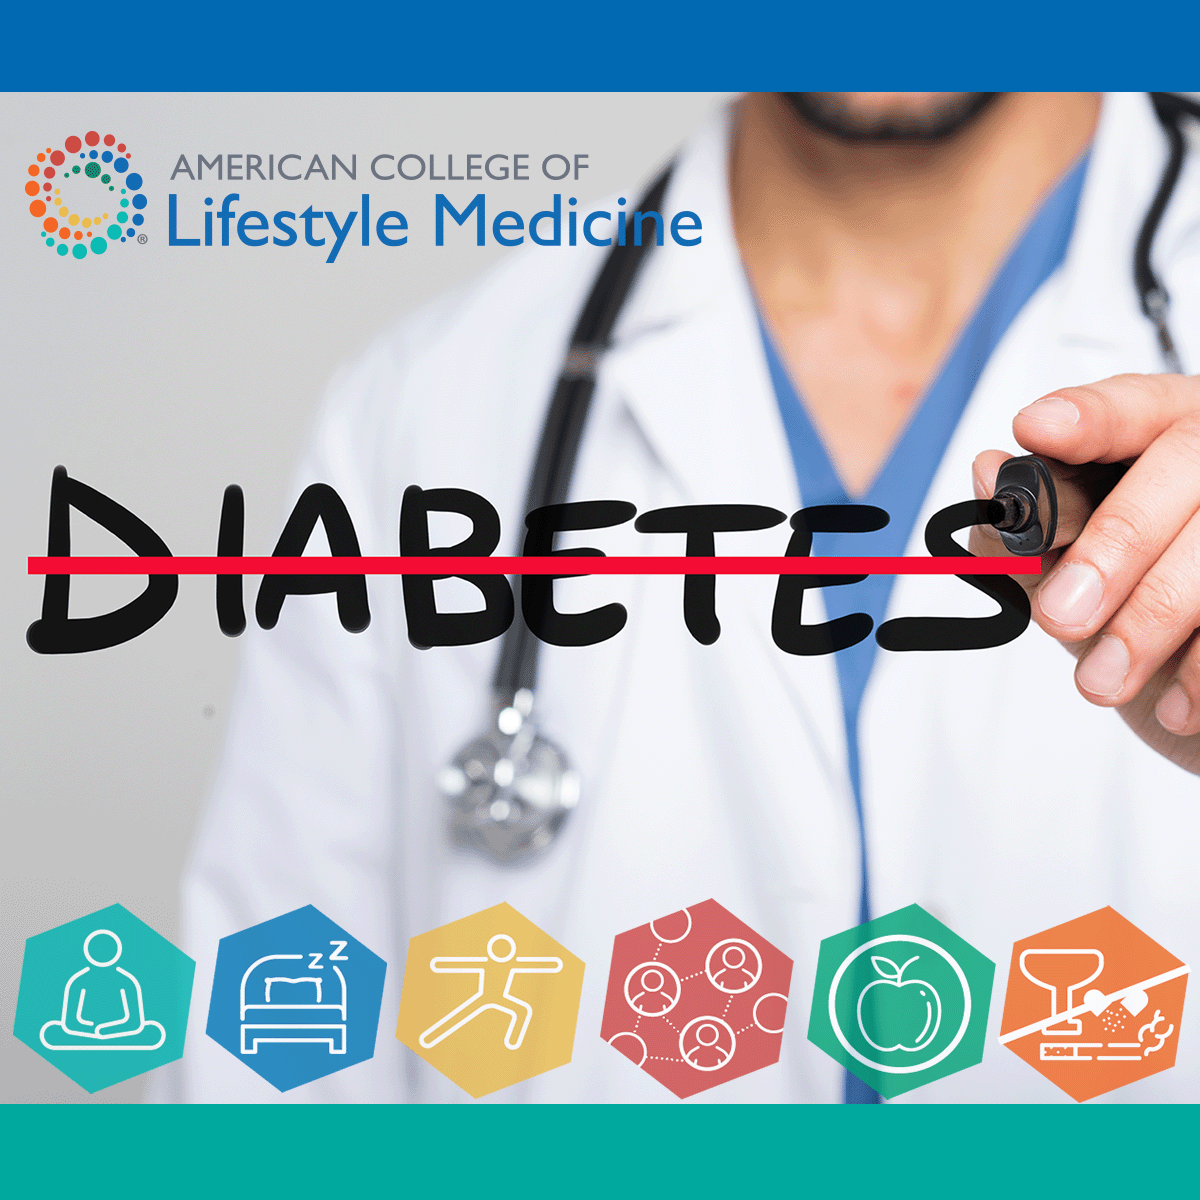 Remission of Type 2 Diabetes and Reversal of Insulin Resistance with Lifestyle Medicine